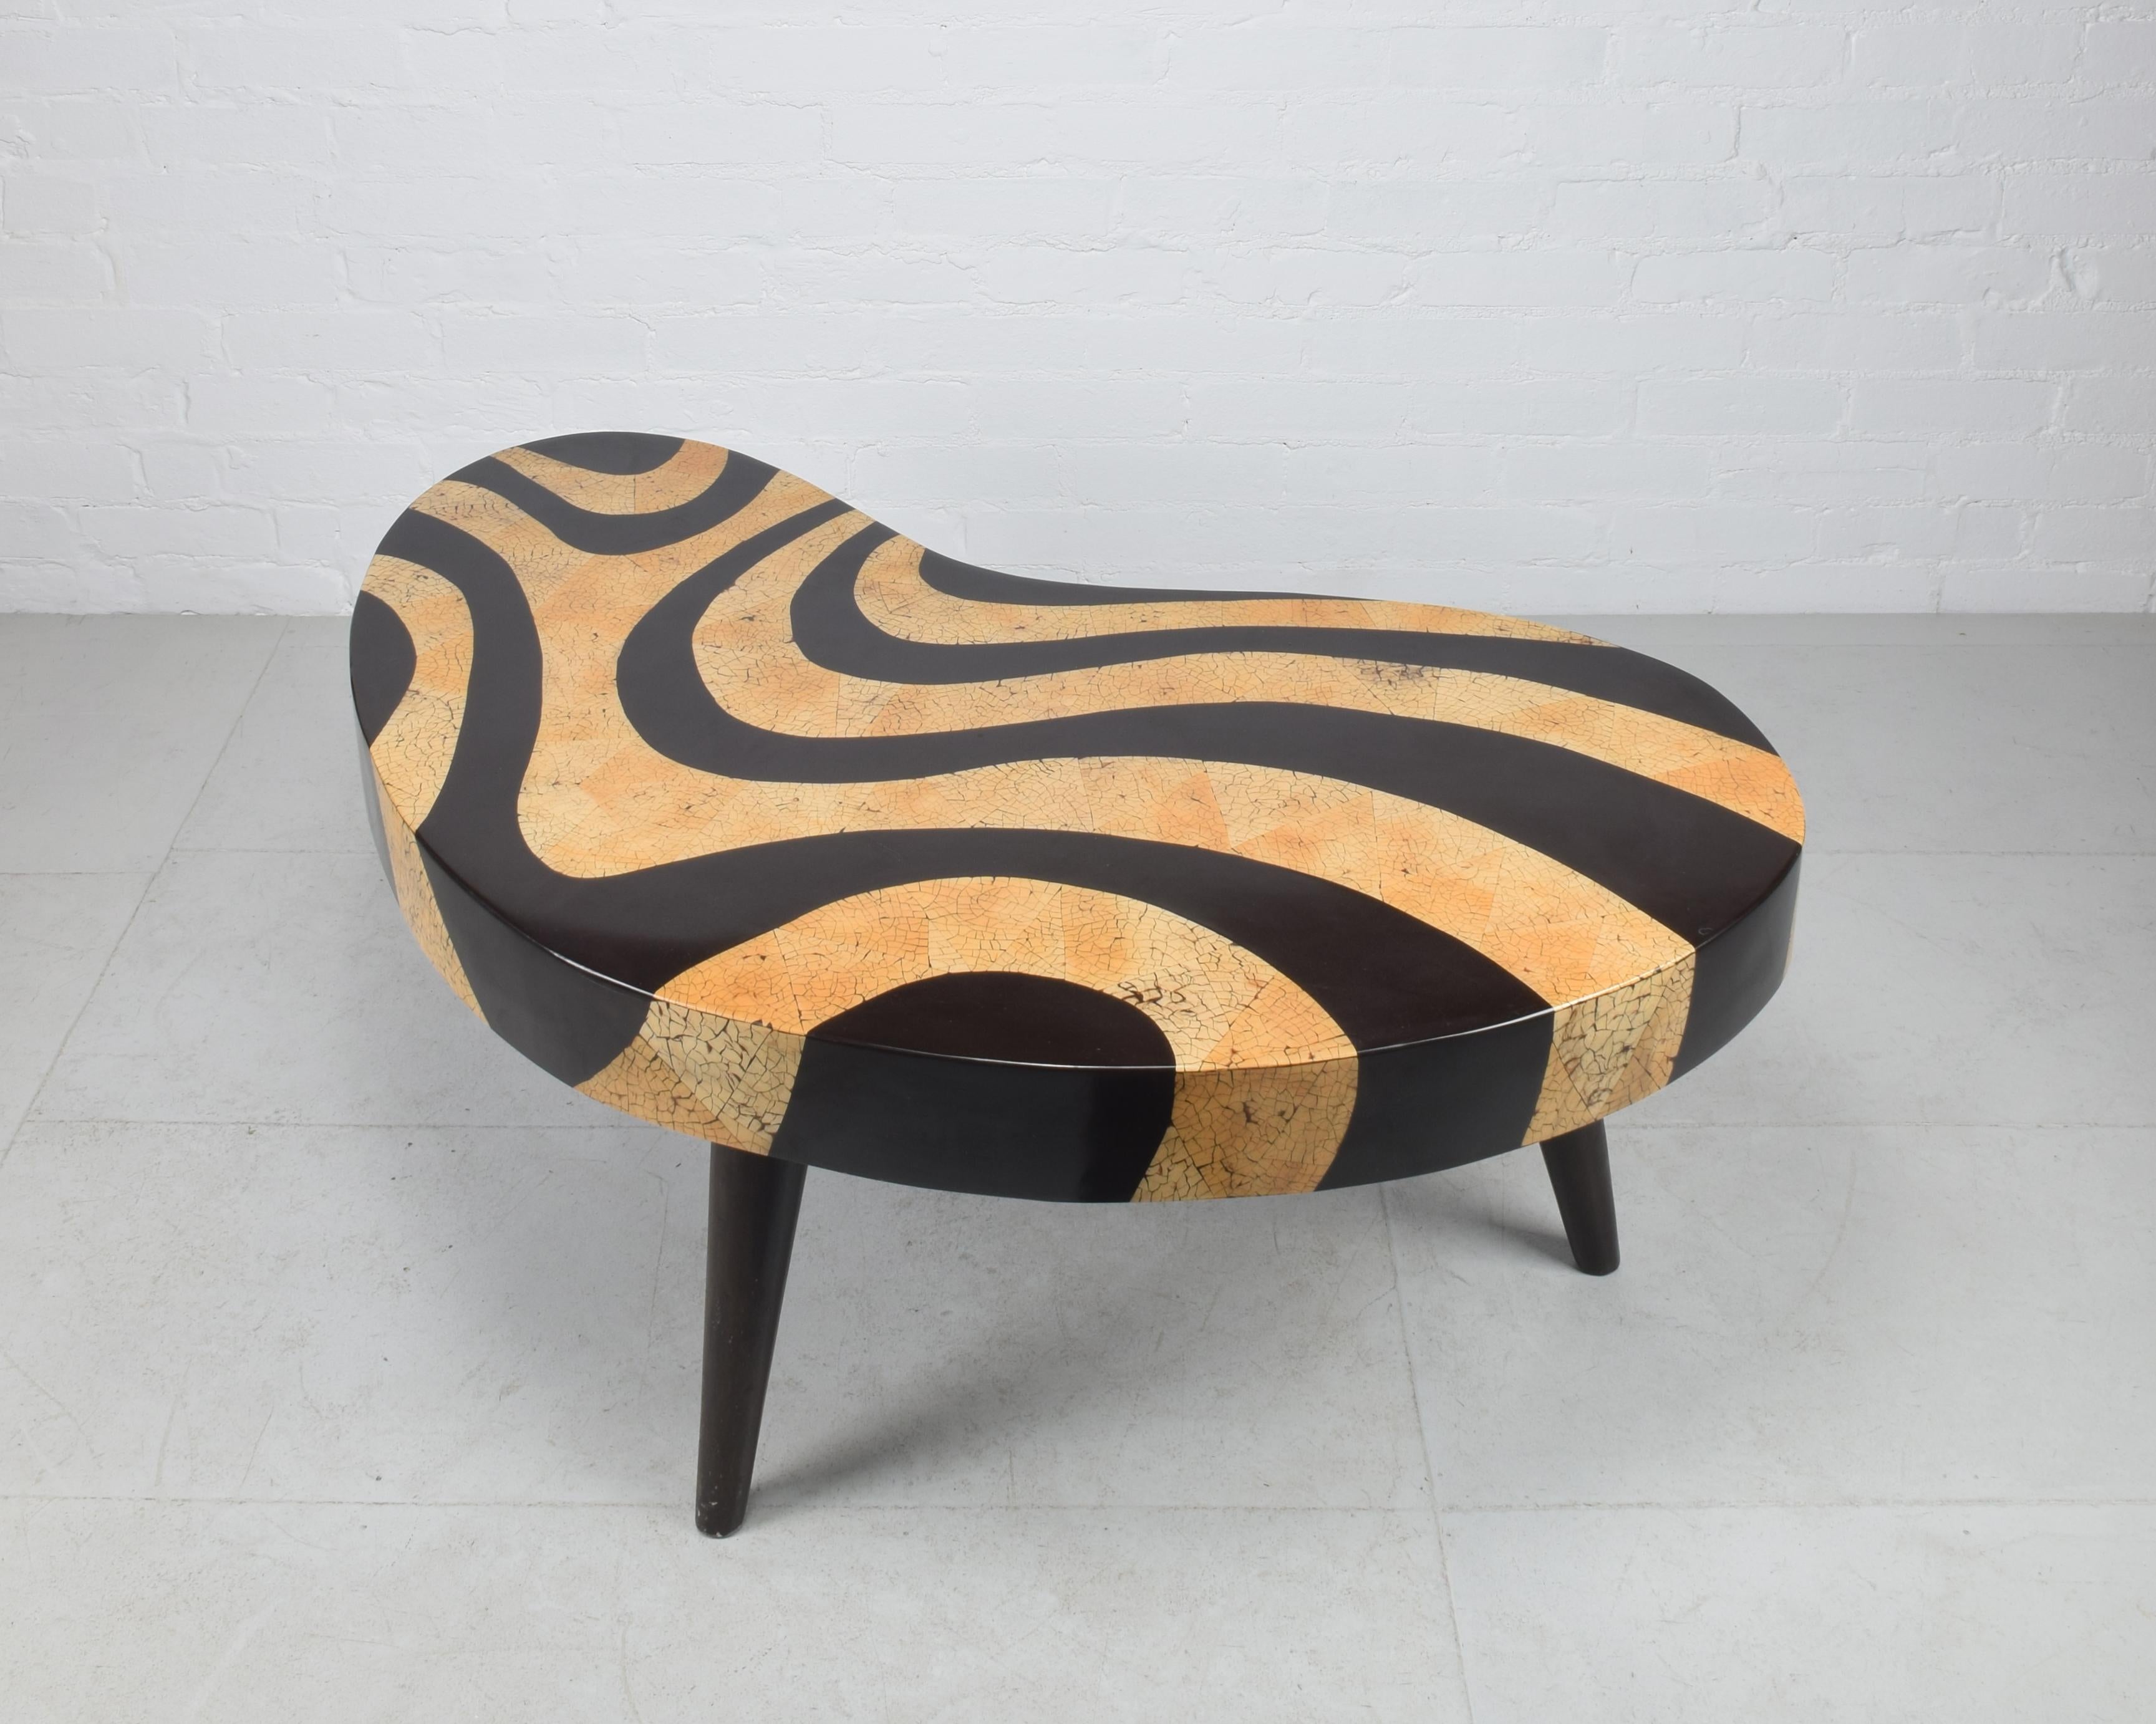 Biomorphic kidney-shaped coffee table with faux eggshell lacquer mosaic pattern For Sale 2